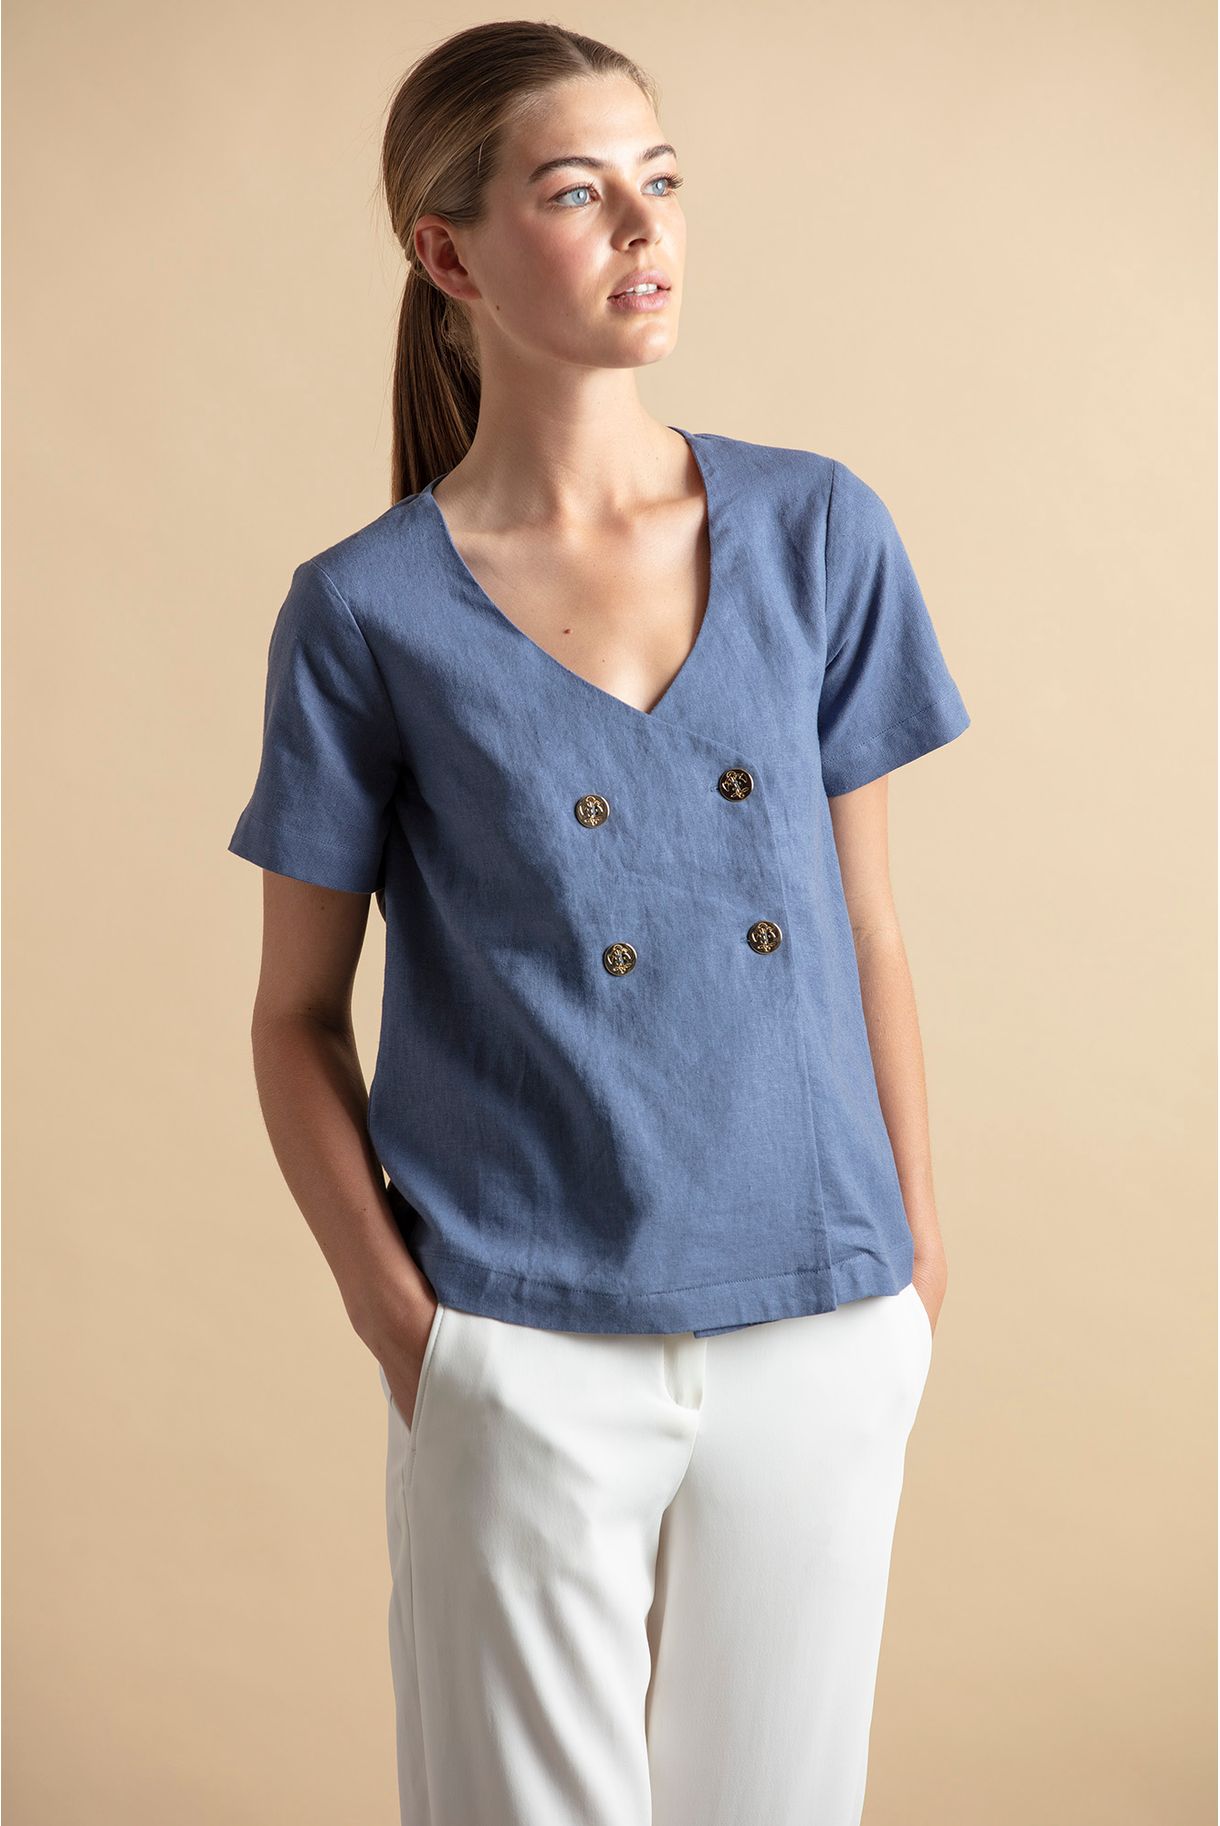 Linen blouse with gold buttons